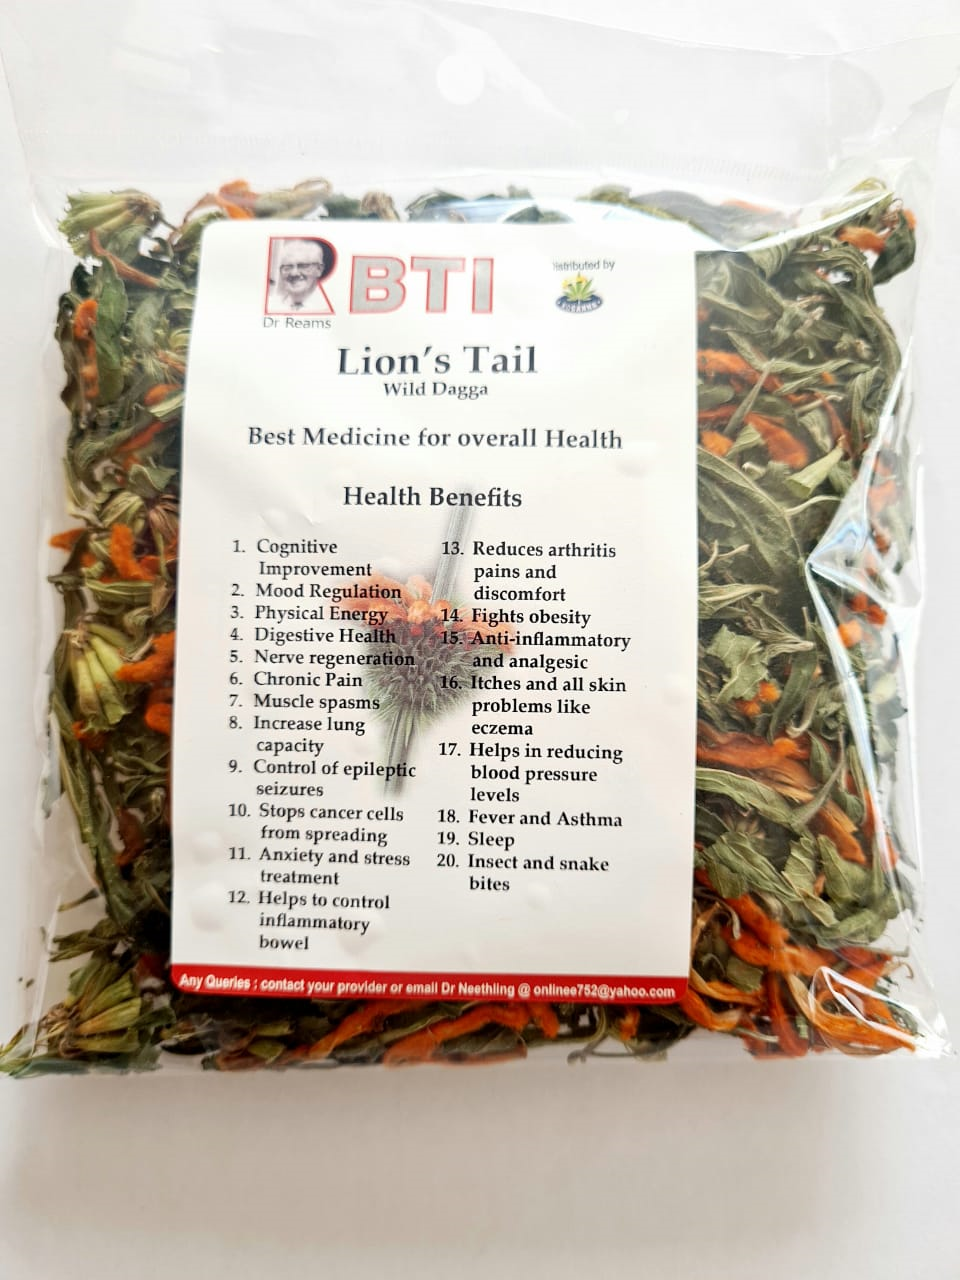 Lions Tail, Imuyane, Imvovo, Wild Dagga.  R150.00 FOR MONTHLY SUPPLY. (PLUS DELIVERY)    BEST MEDICINE FOR OVERALL HEALTH!    HEALTH BENEFITS: -WEIGHT LOSS                                    -CHRONIC PAIN                                    - CANCER                                   - ARTHRITIS                                   - INSOMNIA(SLEEP)                                   - ASTHMA                                   - FEVER/COLD/FLU                                   - ANXIETY/STRESS         